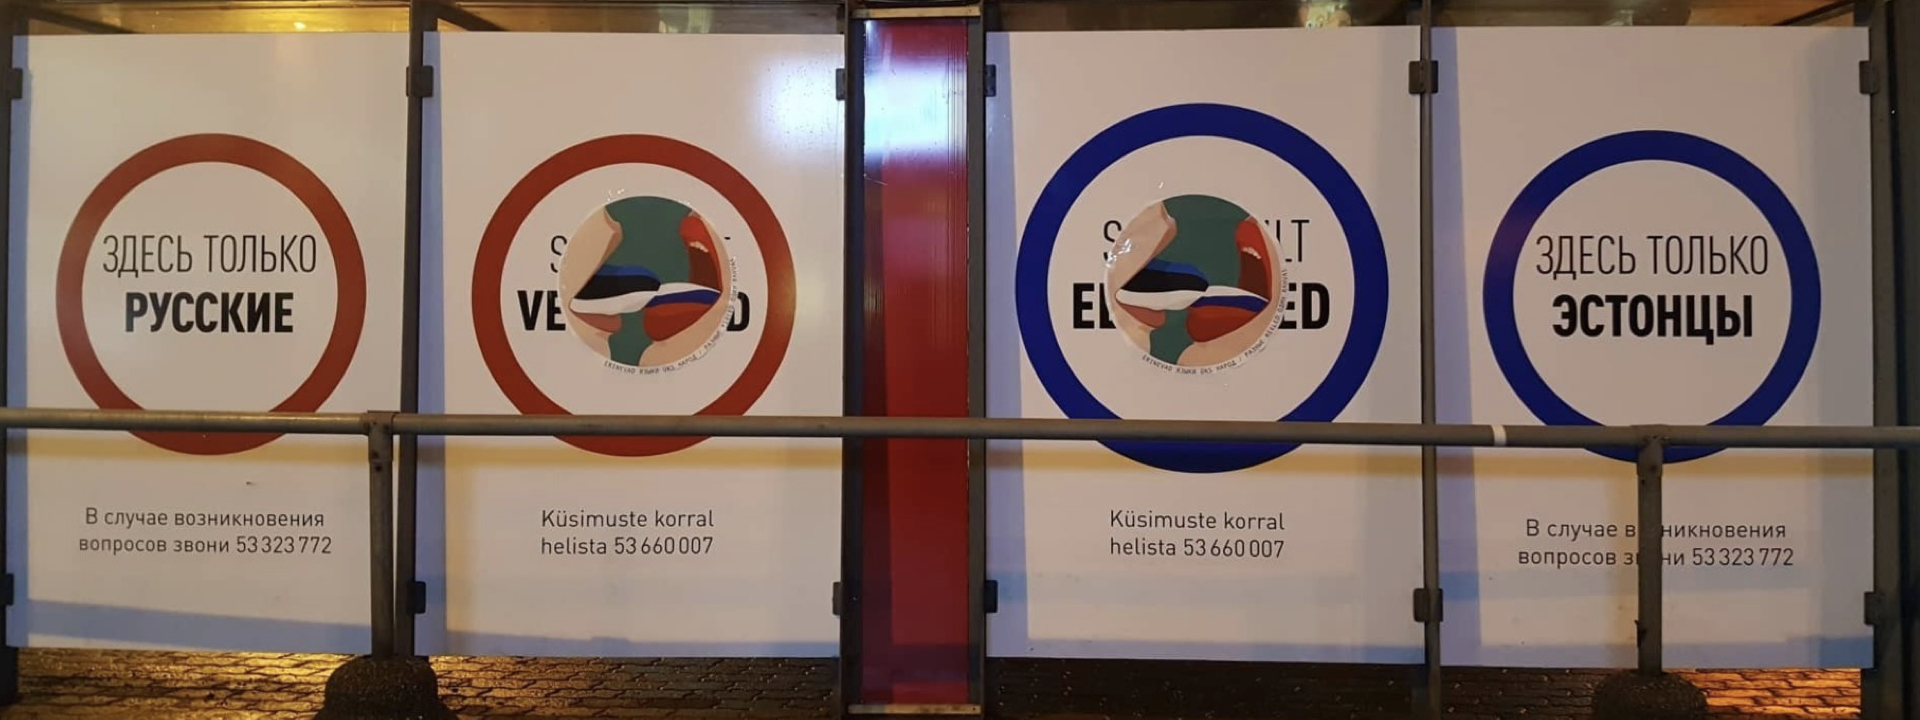 #ElectionWatch: Loaded Language Ads Ahead of Estonian Elections